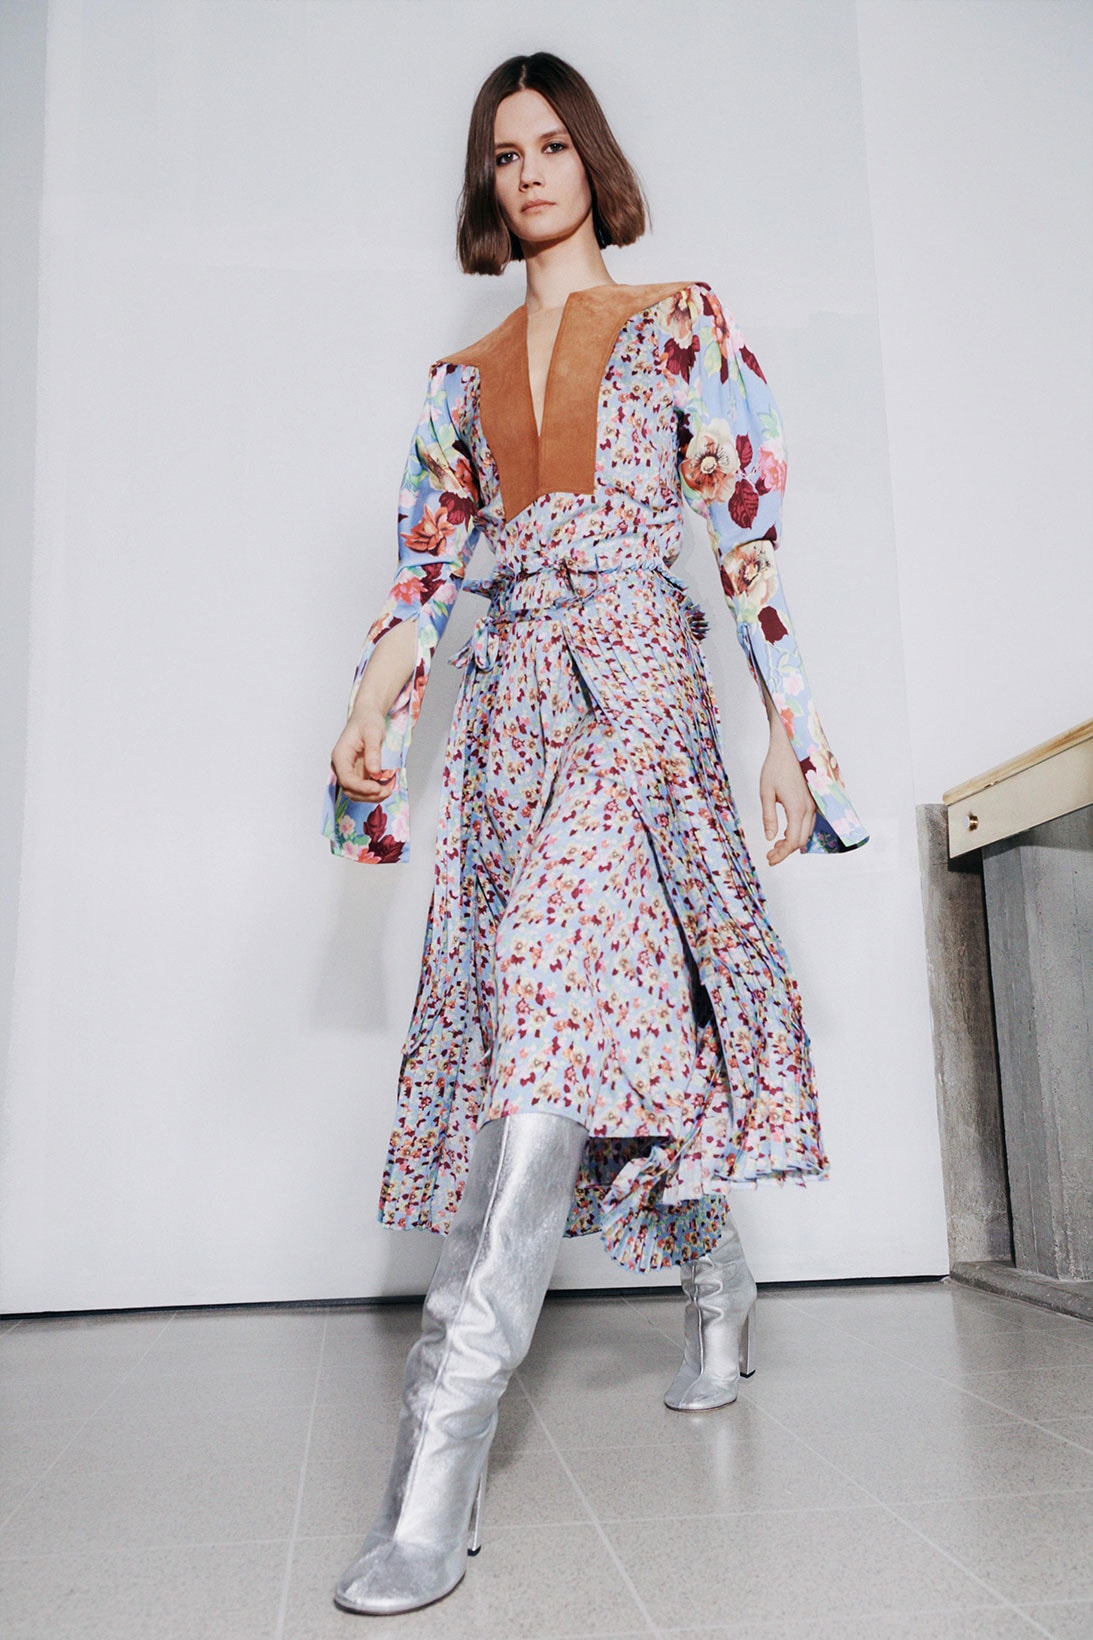 victoria beckham fall winter 2021 fw21 collection floral print pattern dress